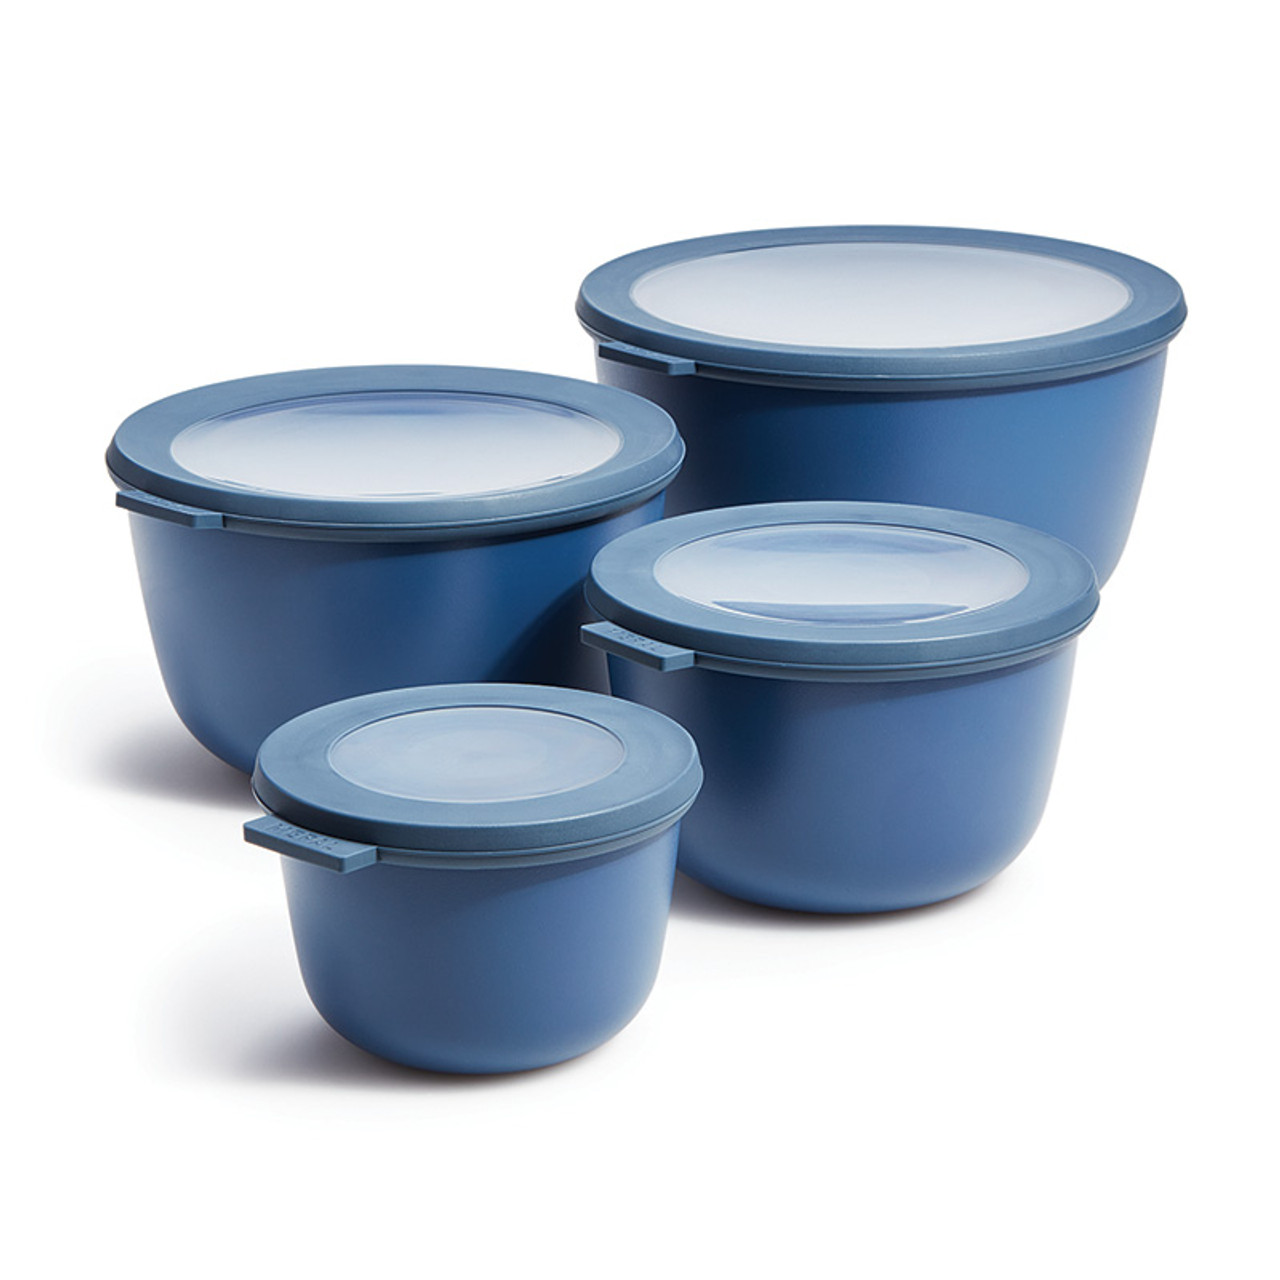 Mepal Microwavable Storage Bowls Review